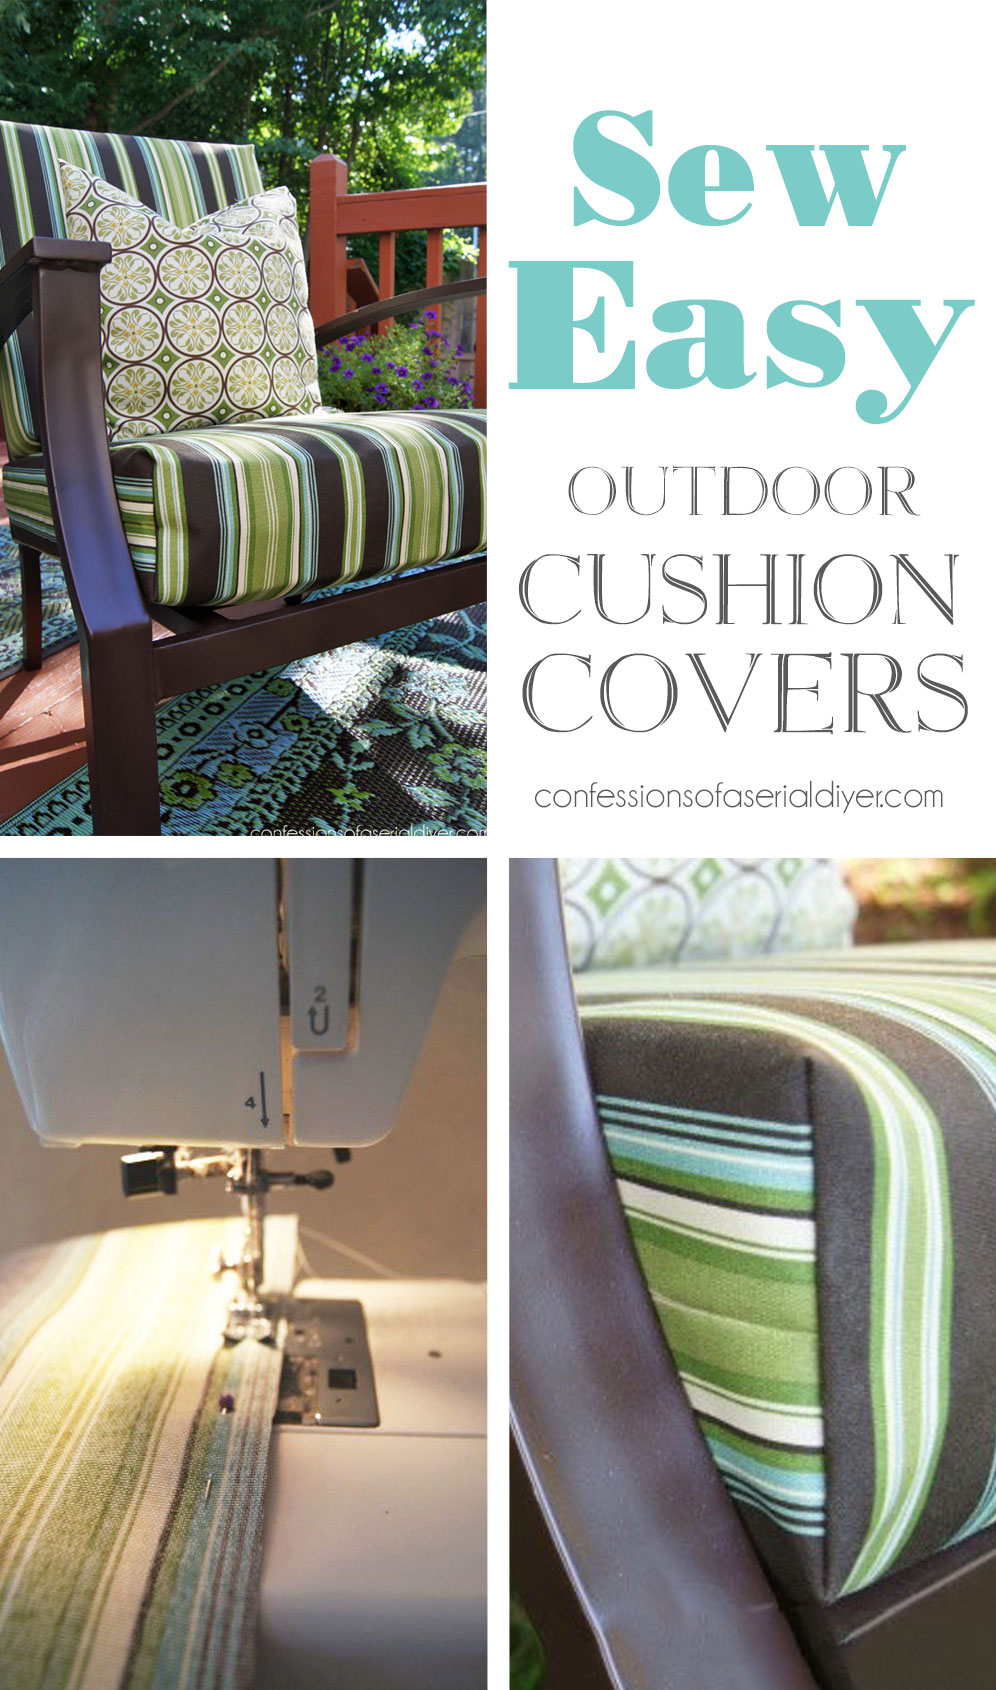 Sew Easy Outdoor Cushion Covers, How To Wash Removable Outdoor Cushion Covers